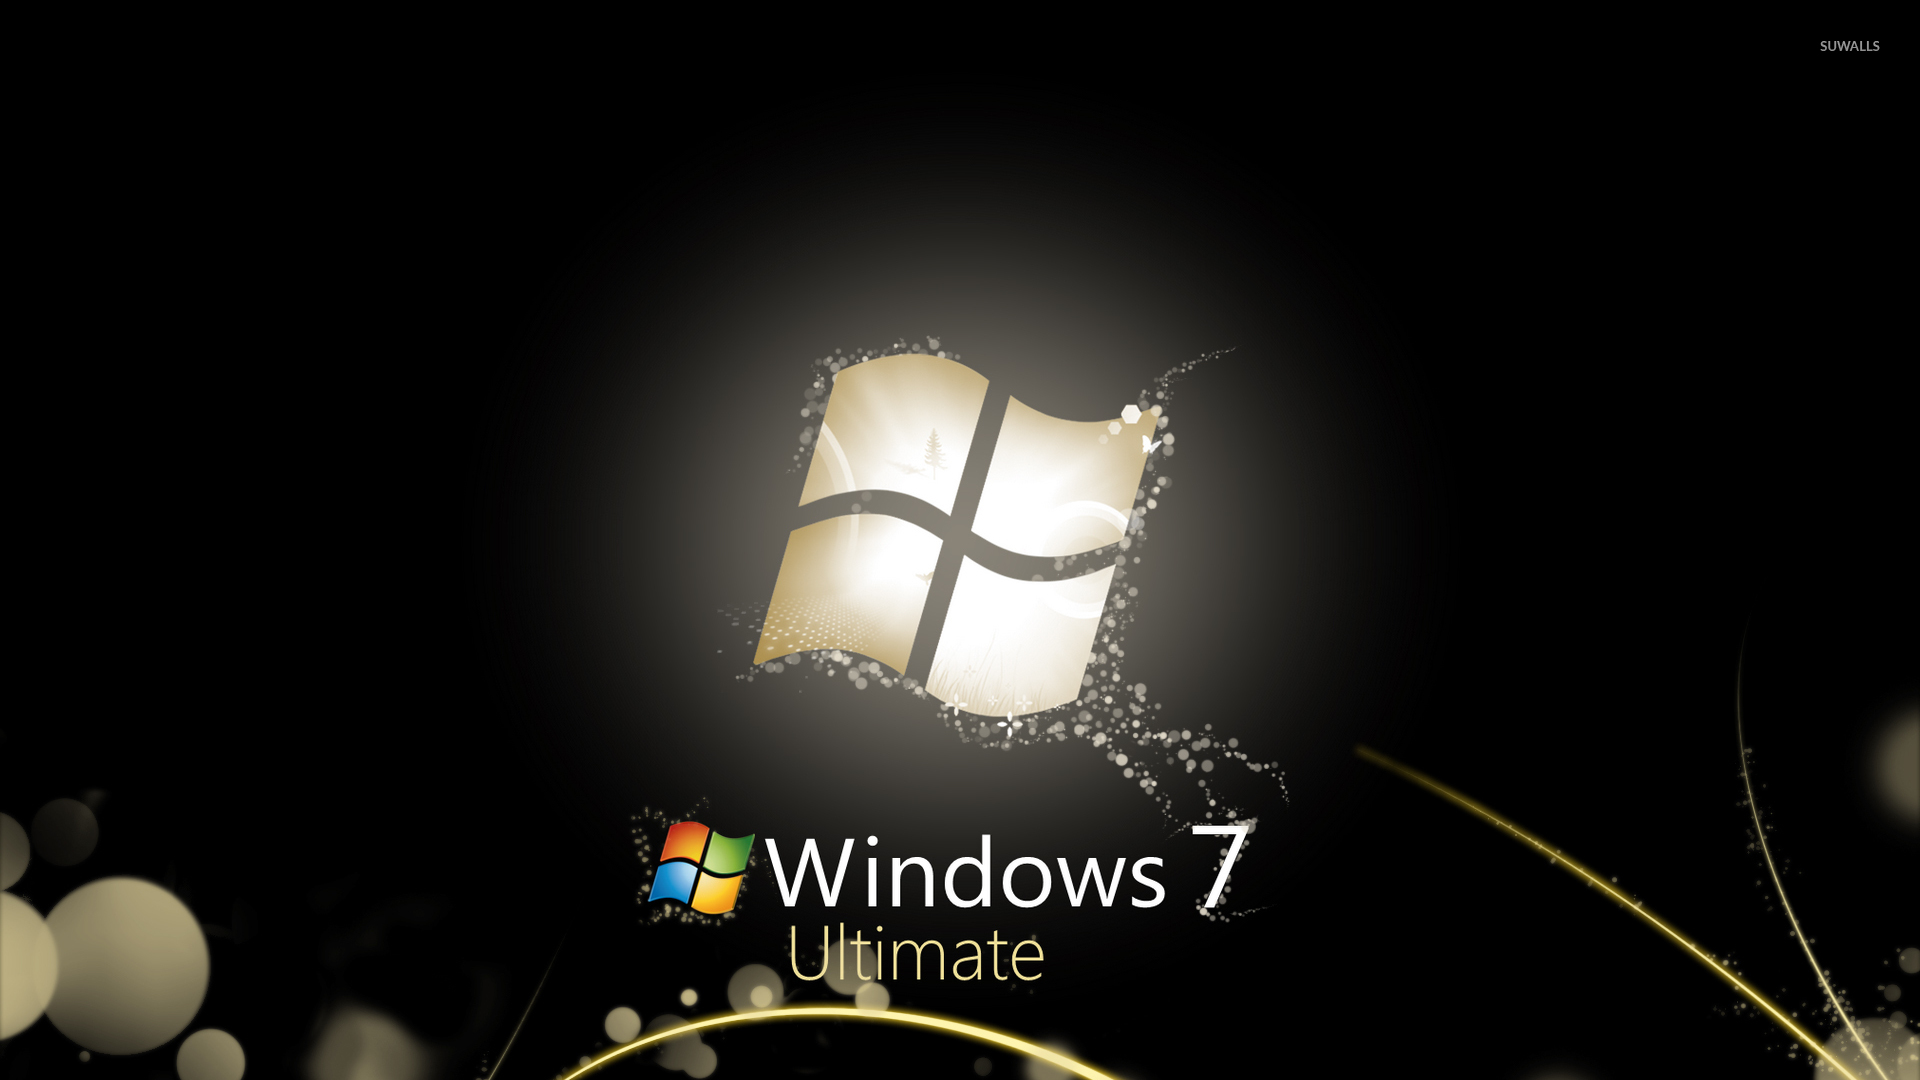 Free download Windows 7 Ultimate wallpaper 1920x1080 [1920x1080] for